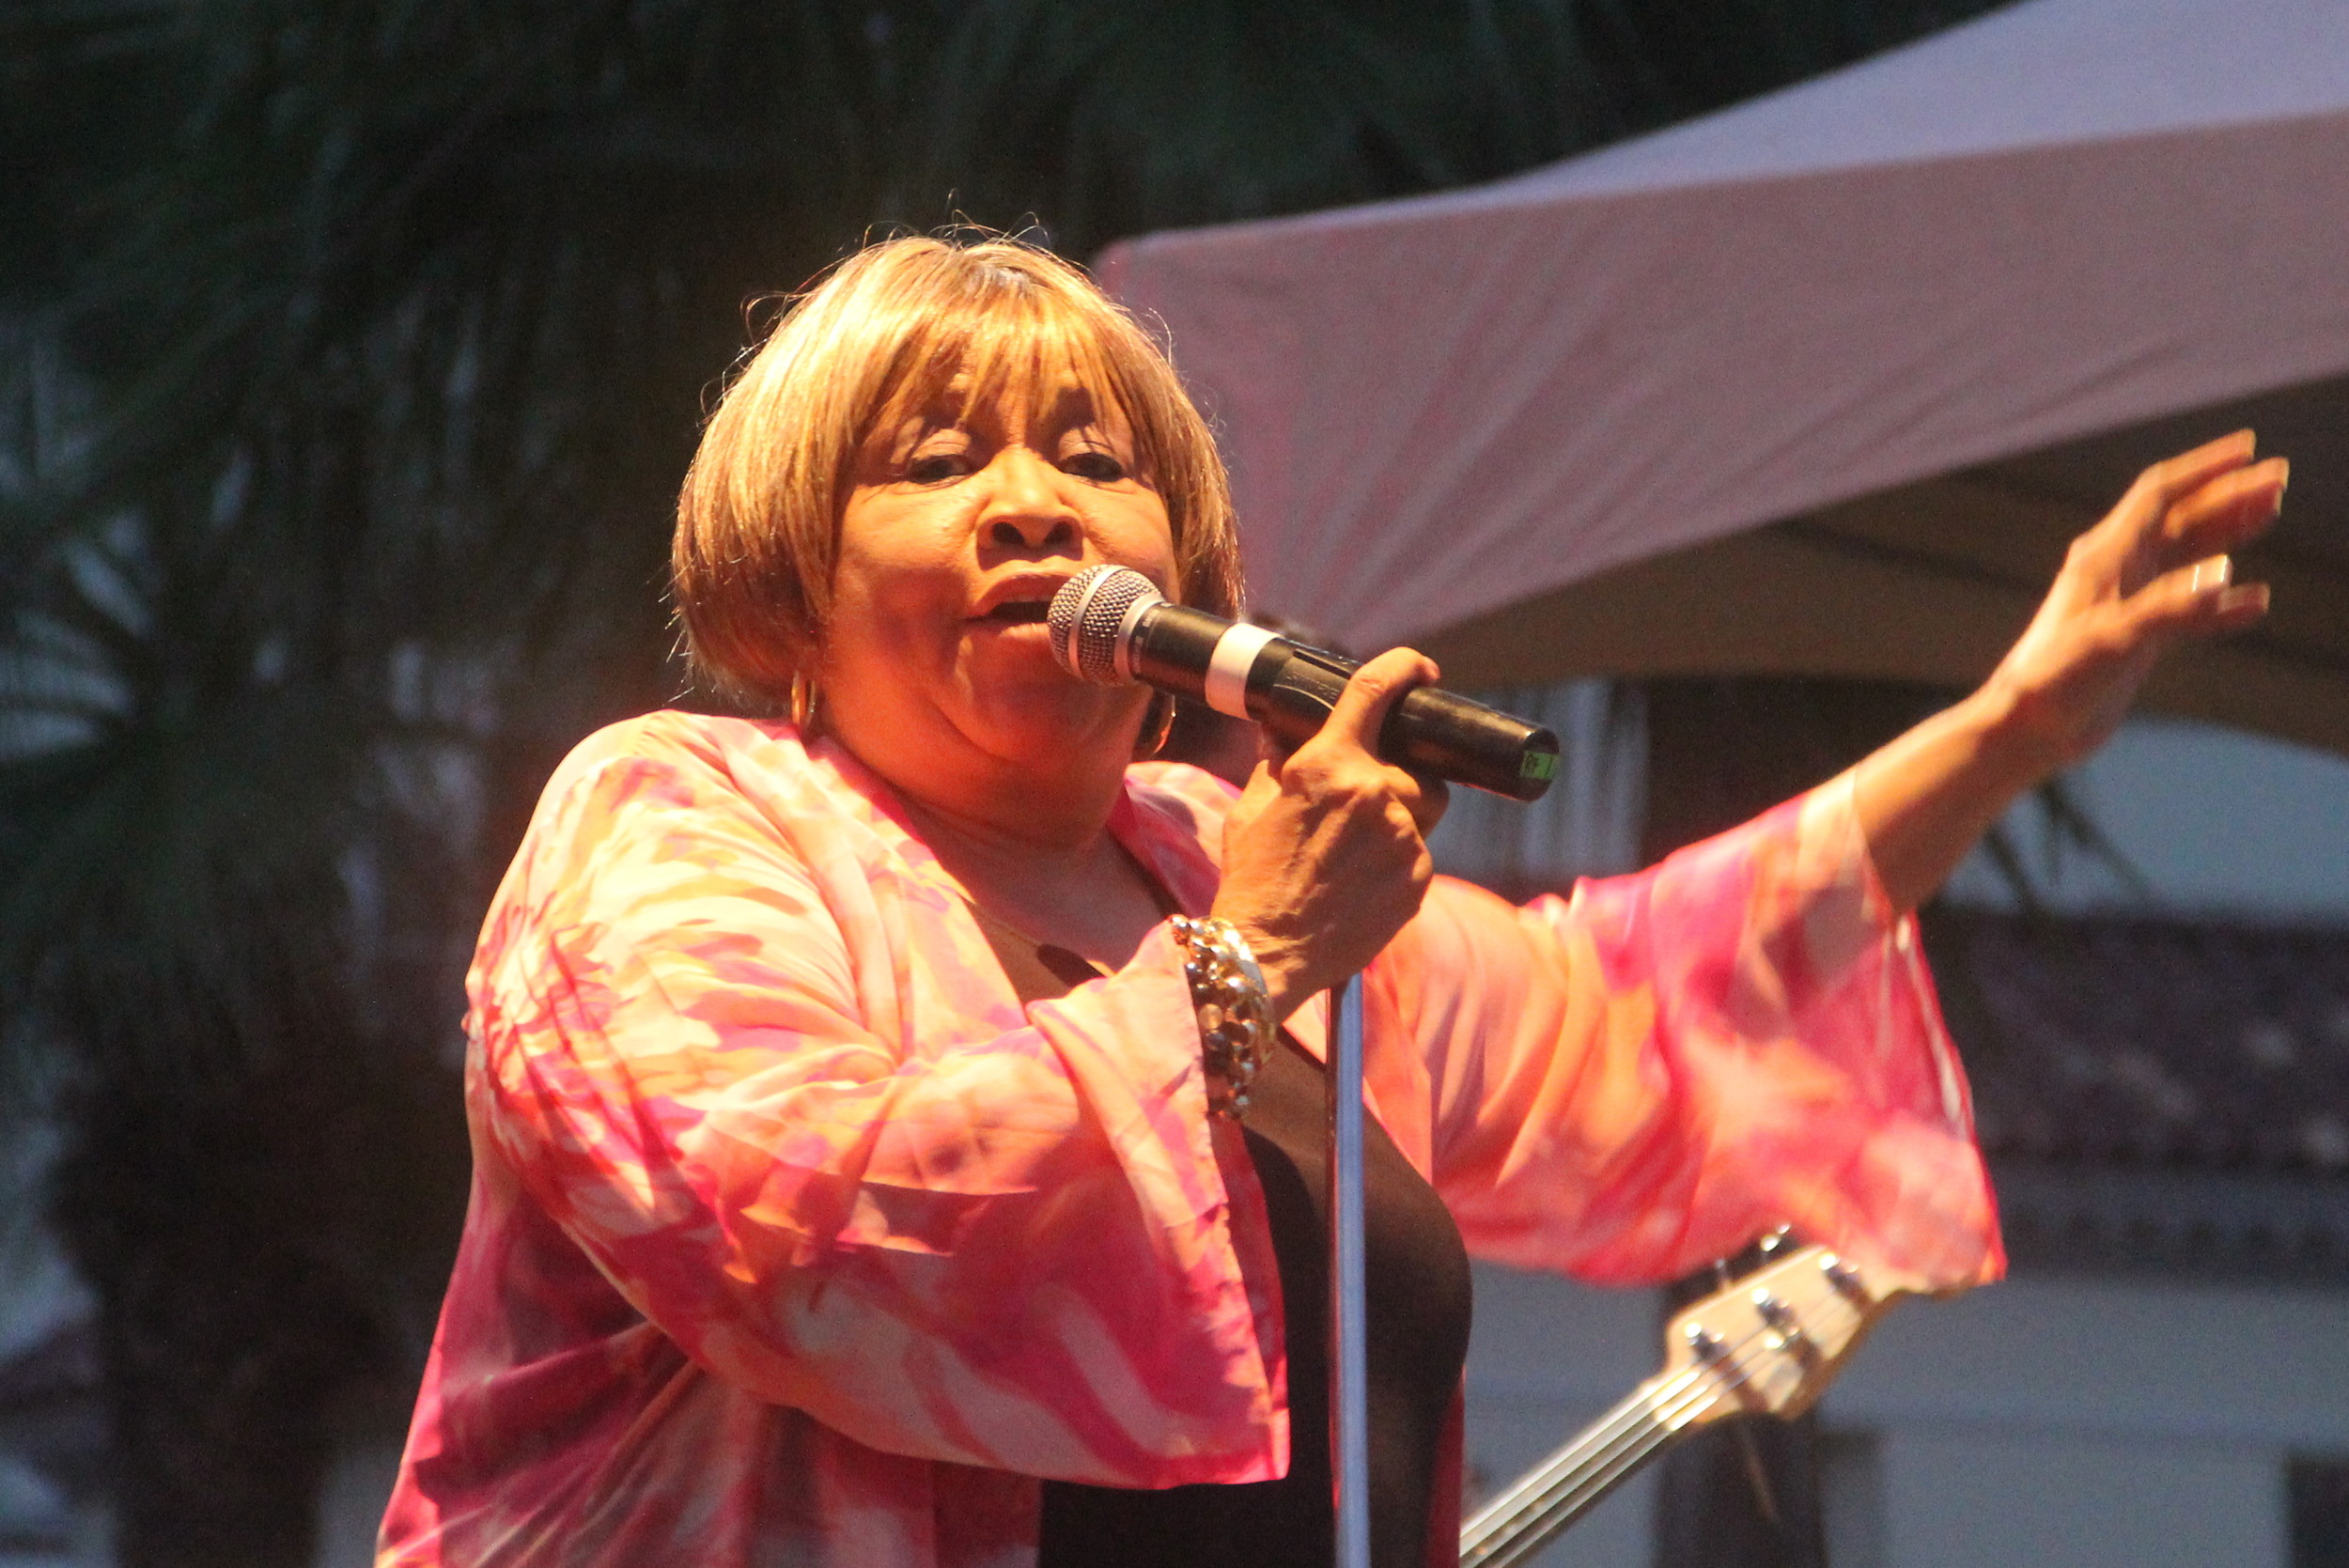 The Legendary Mavis Staple took to the main stage Friday night at St. Augustine’s 450th Anniversary Celebration.